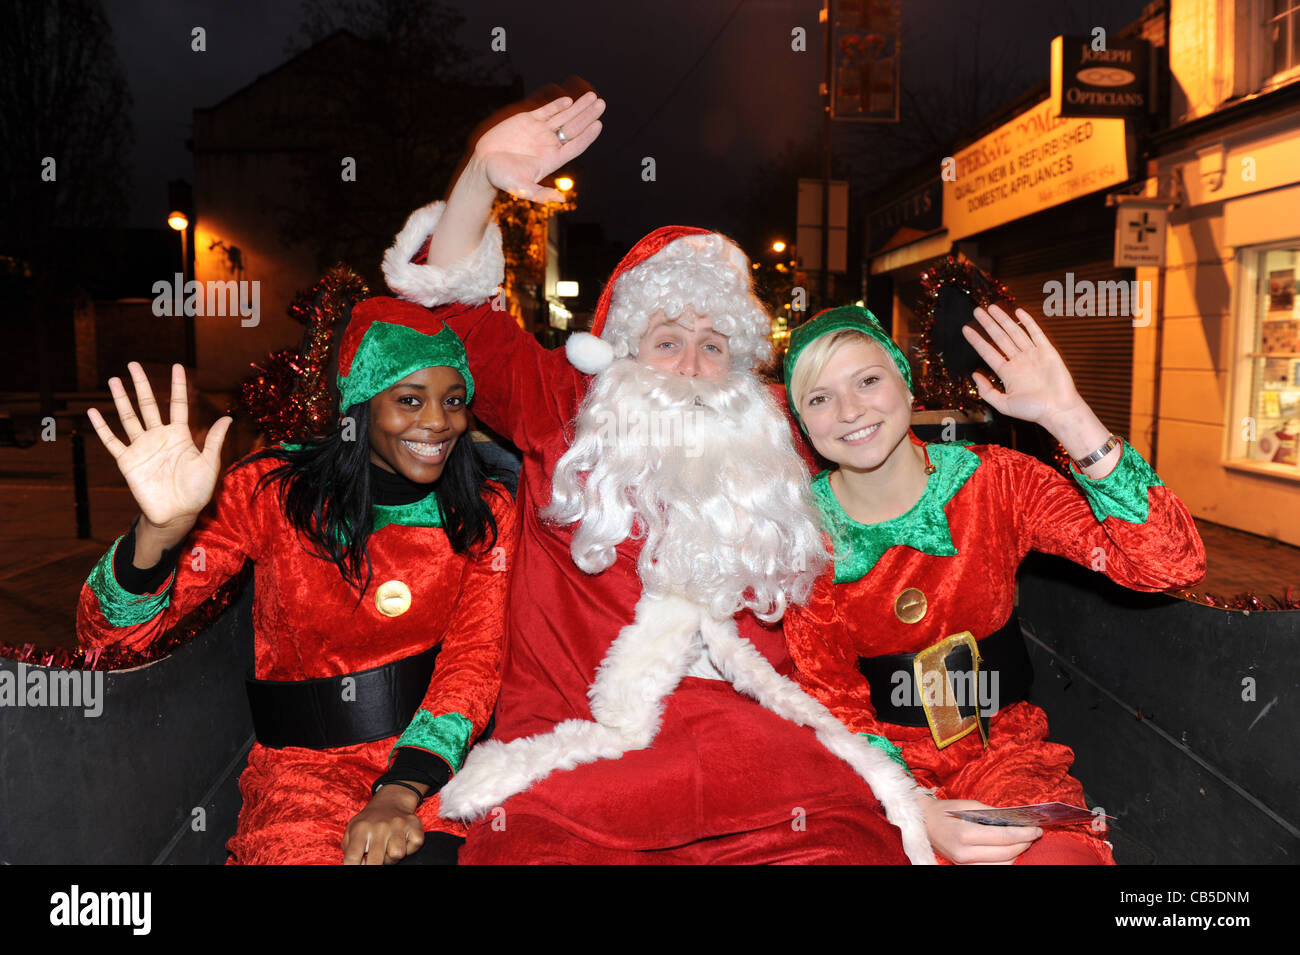 Santa Claus and his helpers Uk Stock Photo